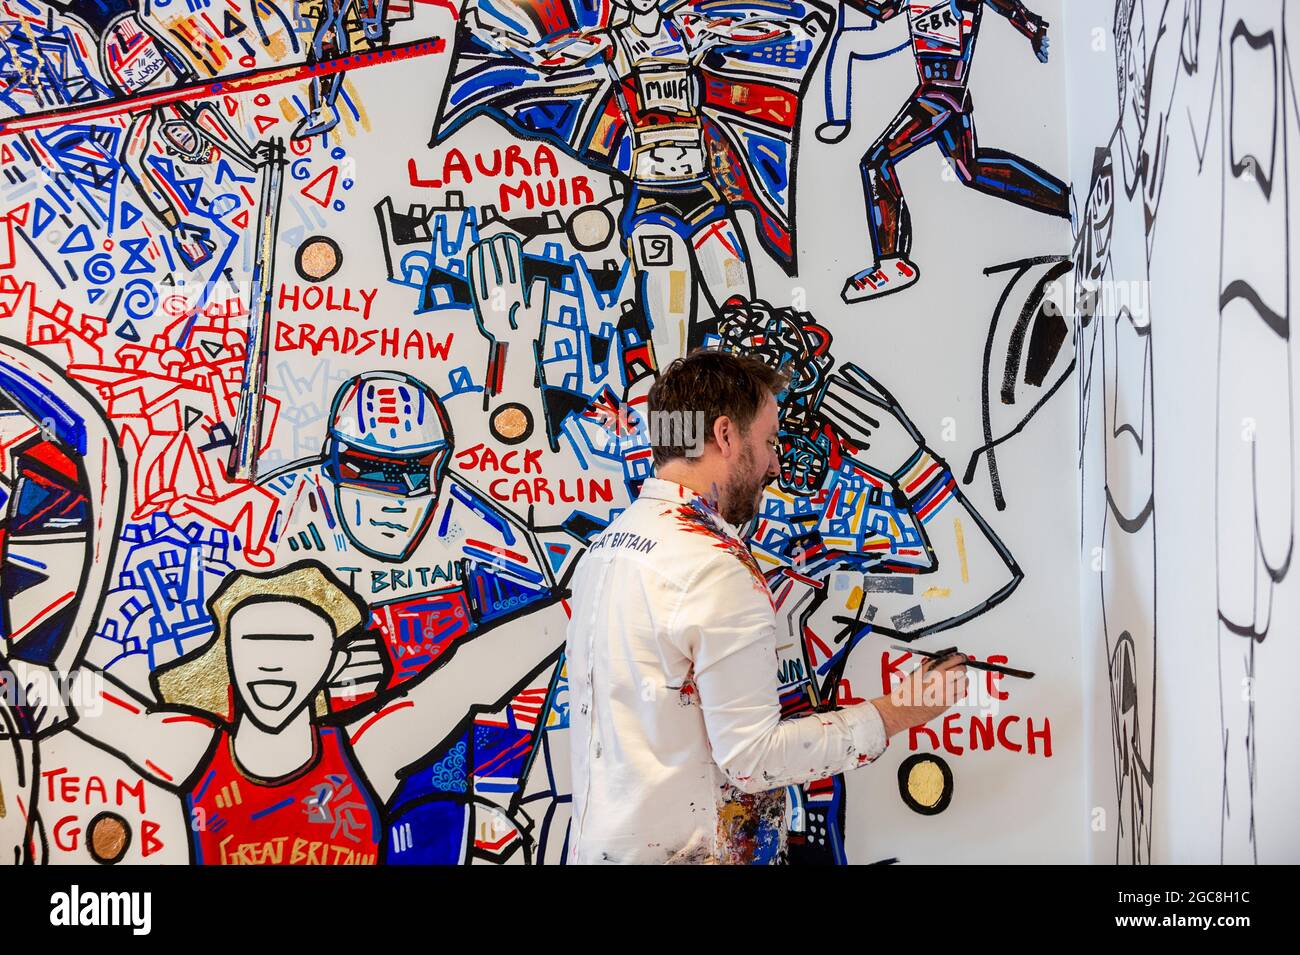 London, UK.  7 August 2021.  Ben Mosley, an action and expressionist painter, works on his wall mural focused on the achievement of Team Great Britain (GB) athletes at the Tokyo Olympics 2020.  Based at the pop-up Team GB Studio in Carnaby Street, he updates his mural daily with athletes' successes. The final day's events and closing ceremony are the work remaining. Team GB has become the first to adopt non-fungible tokens (NFTs) featuring the athletes’ previous achievements, which can be purchased through a dedicated store.  Credit: Stephen Chung / Alamy Live News Stock Photo